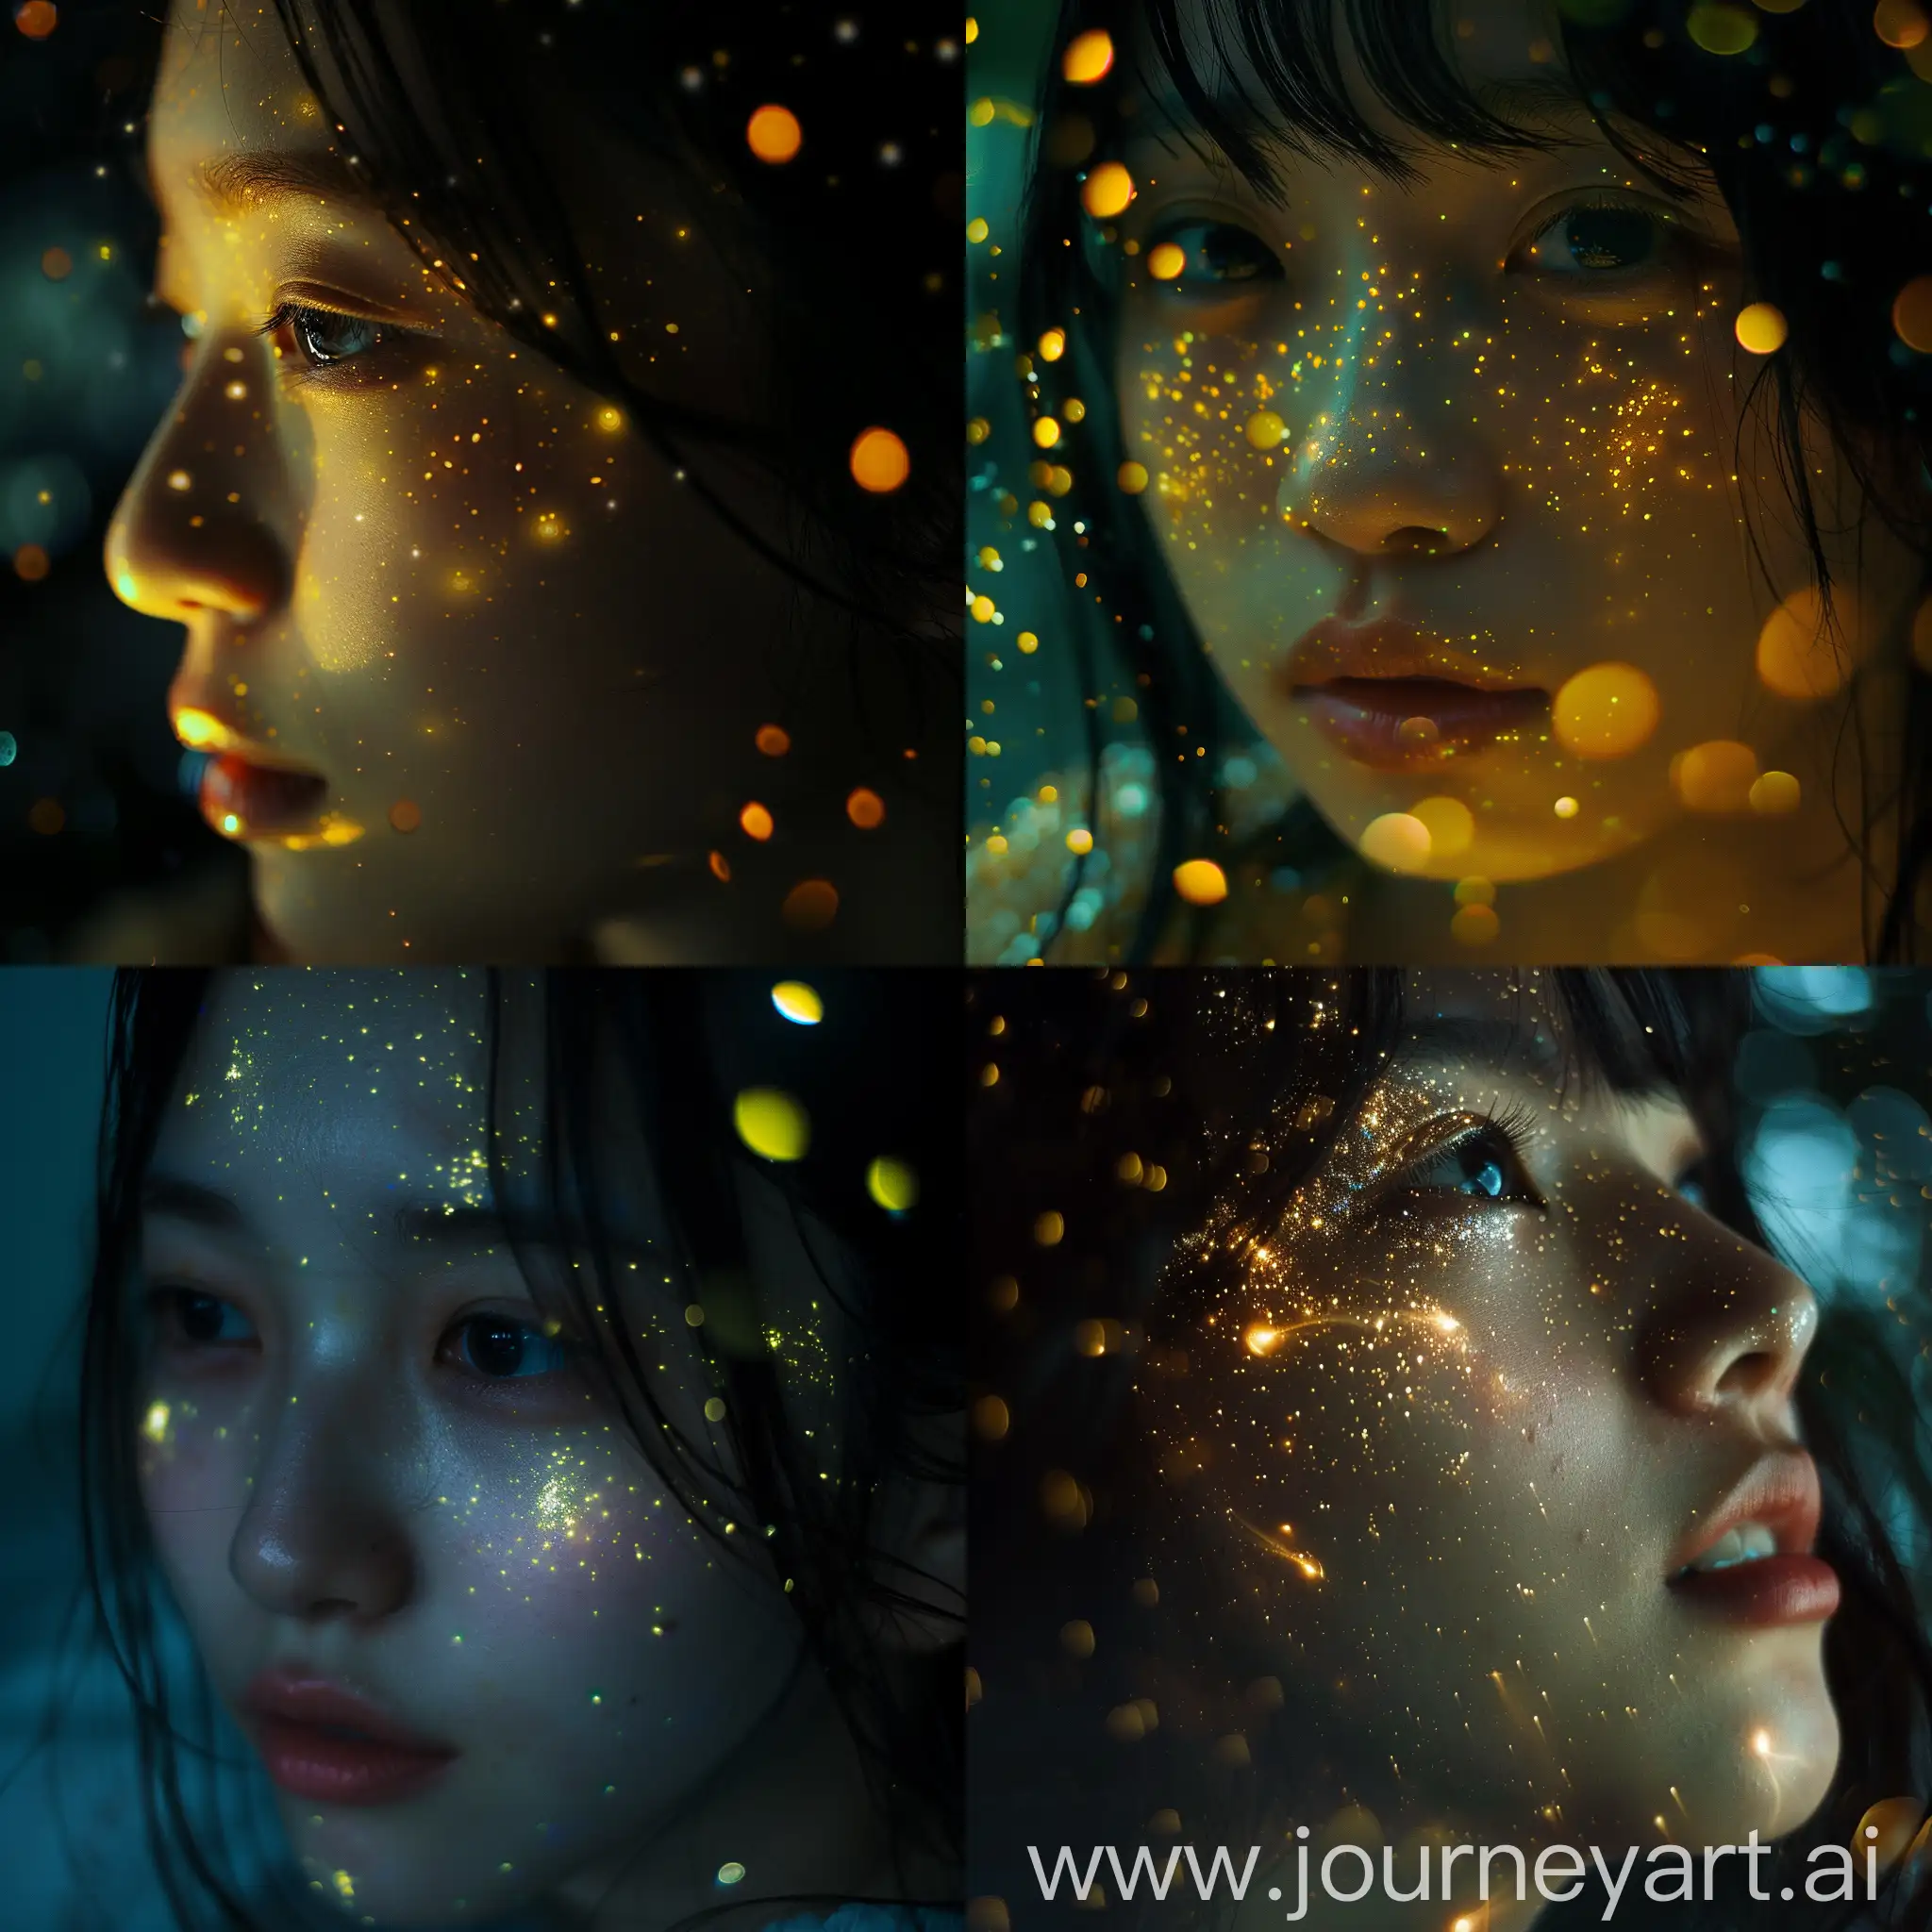 Japanese-Girl-with-Glowing-Face-Surrounded-by-Fireflies-in-a-Dark-Room